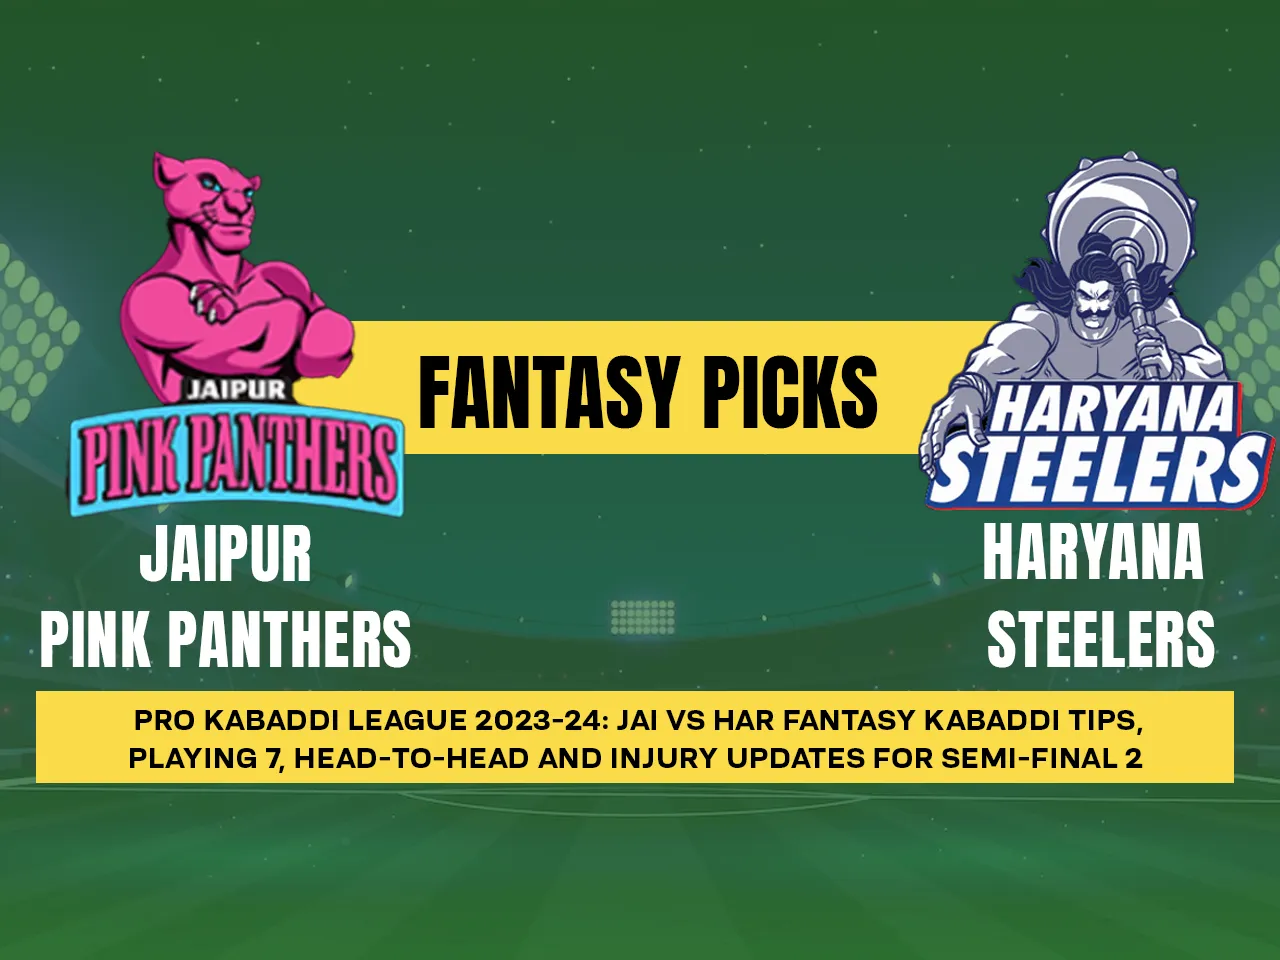 PKL 2023-24: JAI vs HAR Dream11 Prediction for 2nd Semifinals Playing 7 PKL Fantasy Tips Today Dream11 Team and More updates